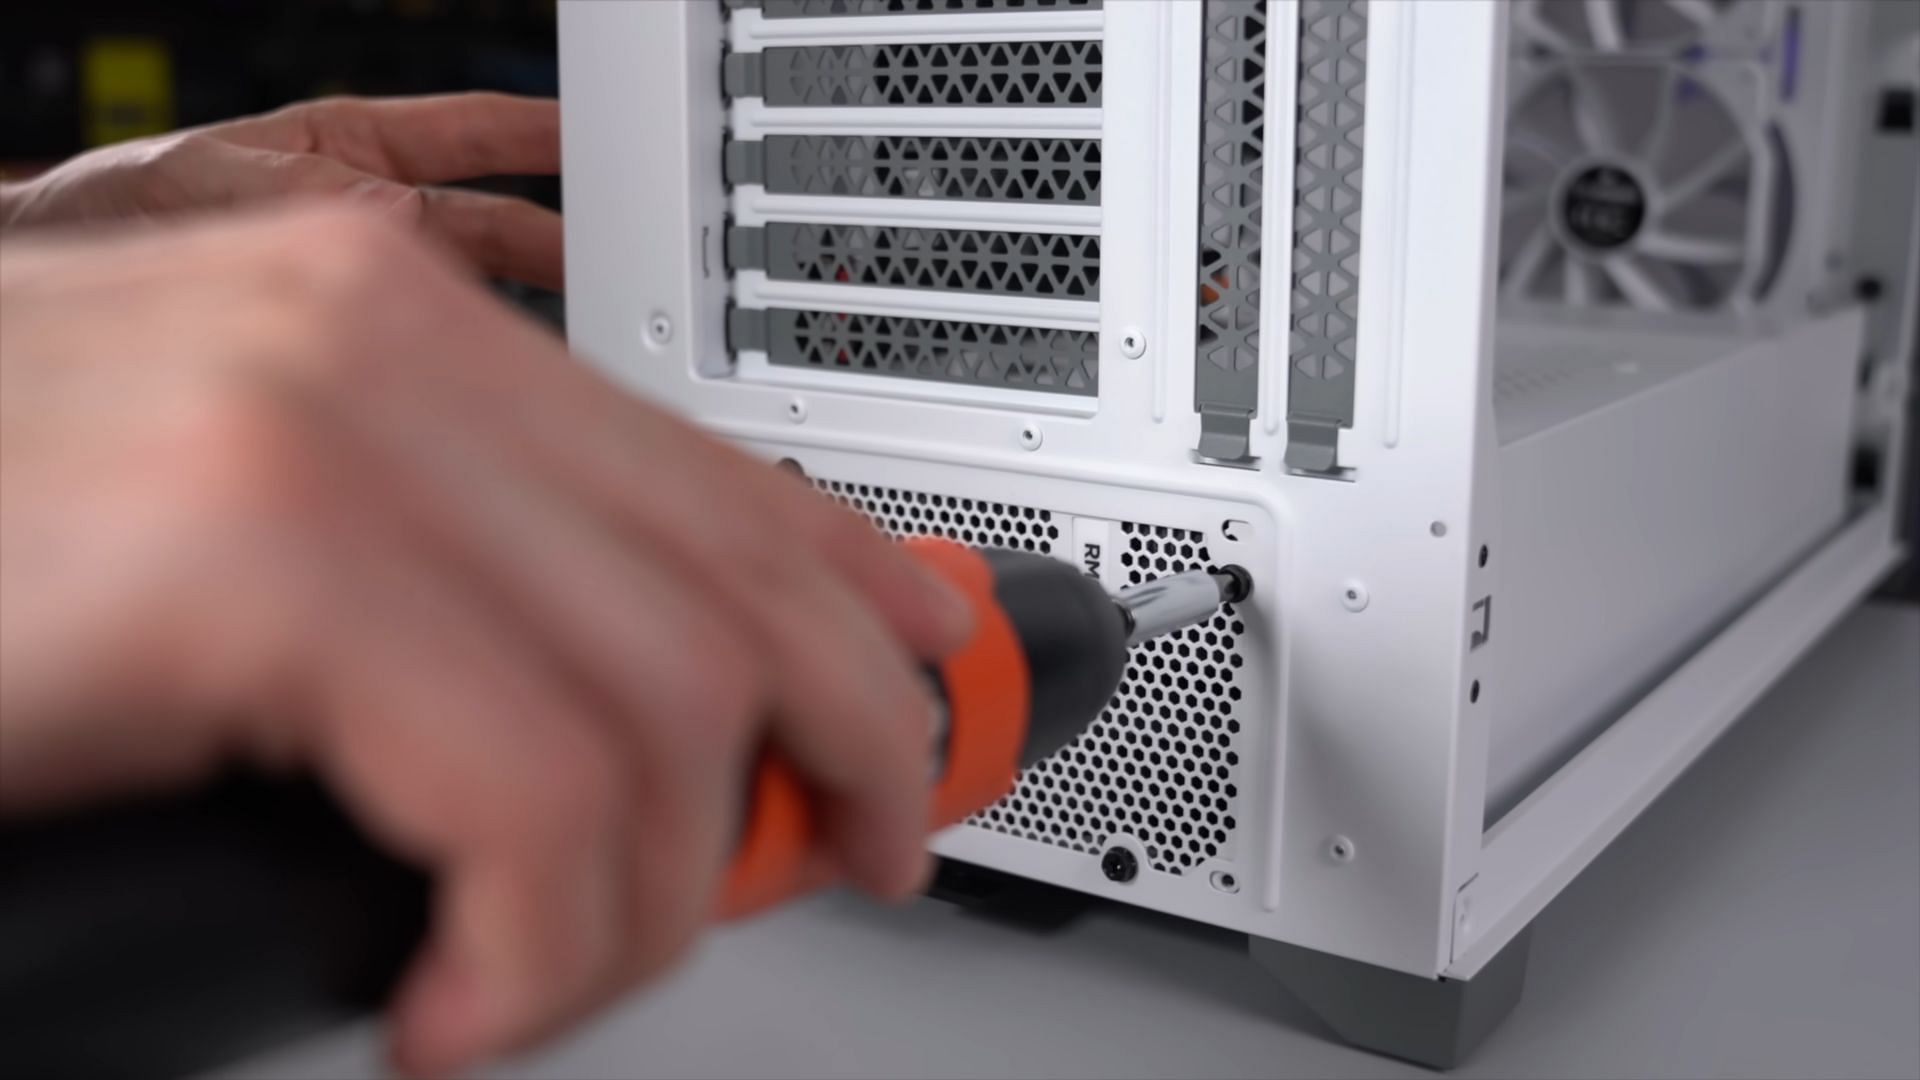 Installation of PSU to build a new gaming PC (Image via TechSource/YouTube)